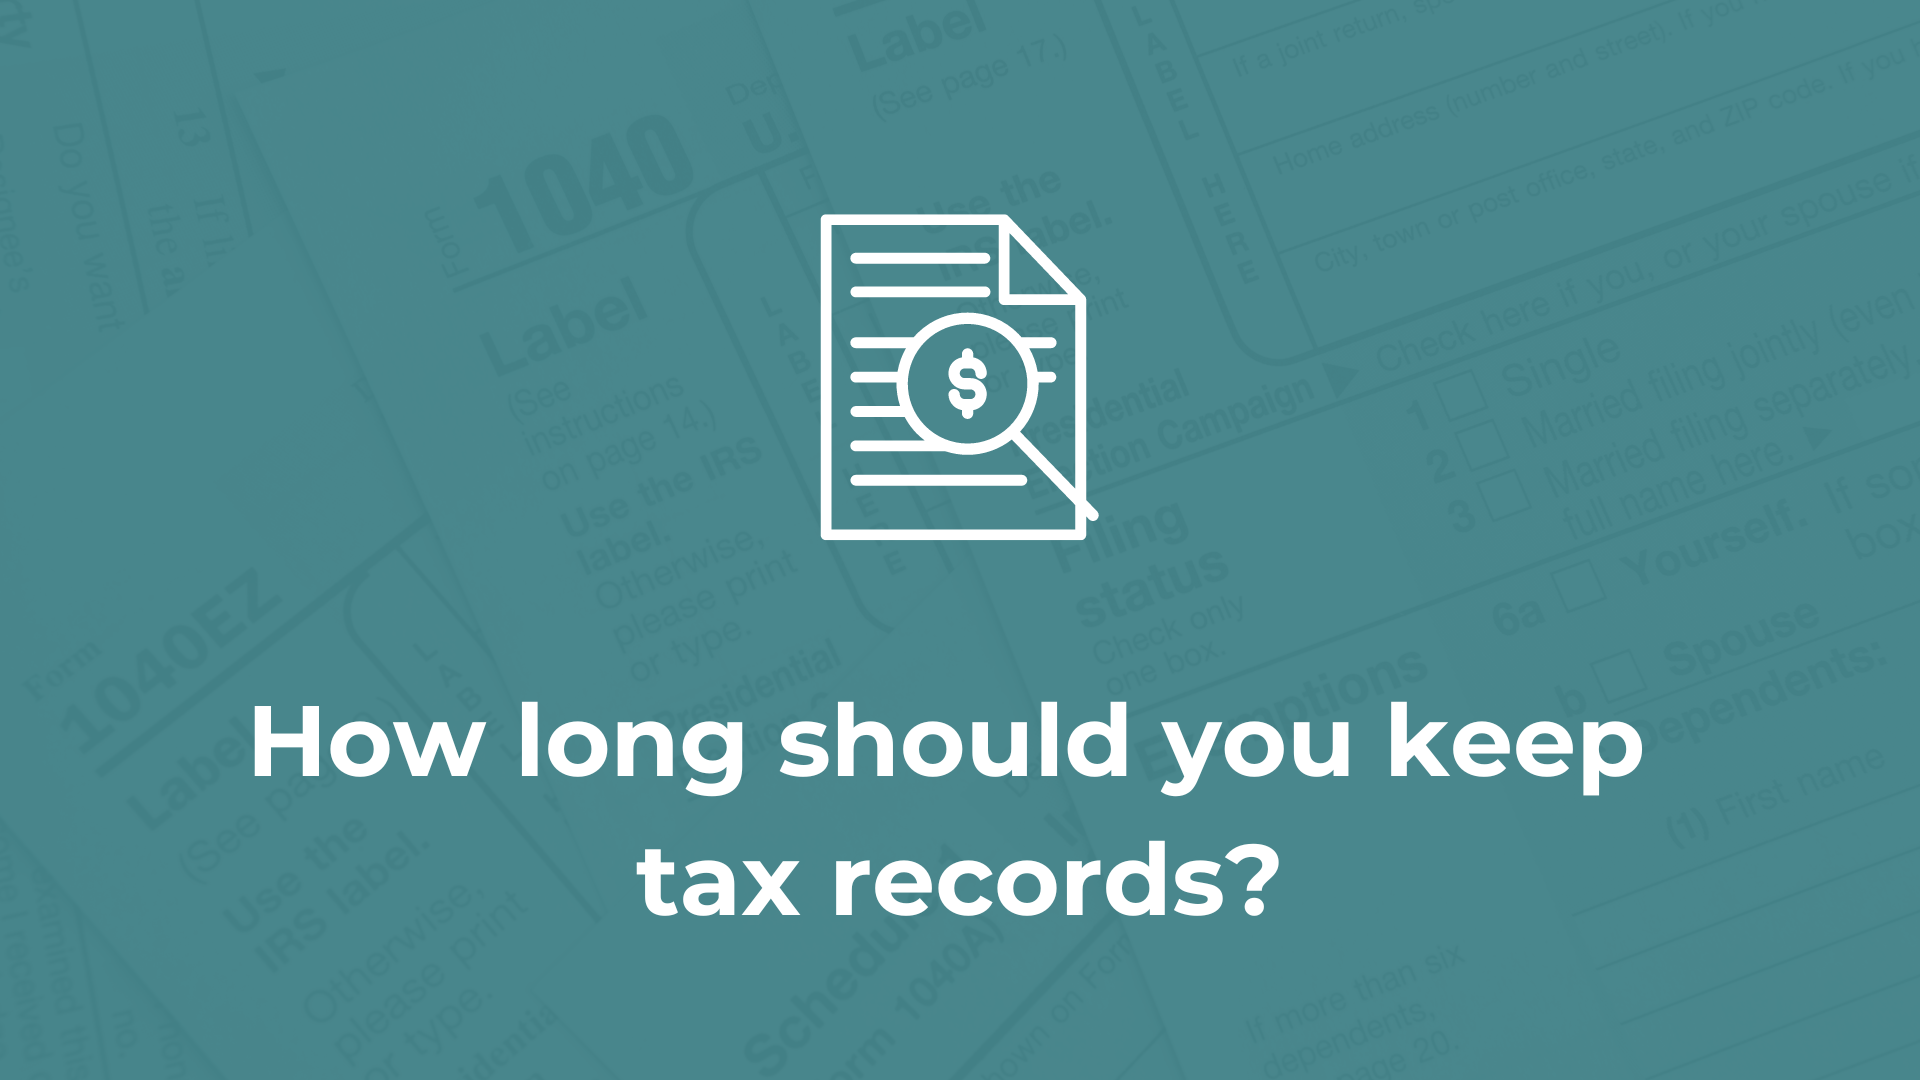 How long should you keep tax records?